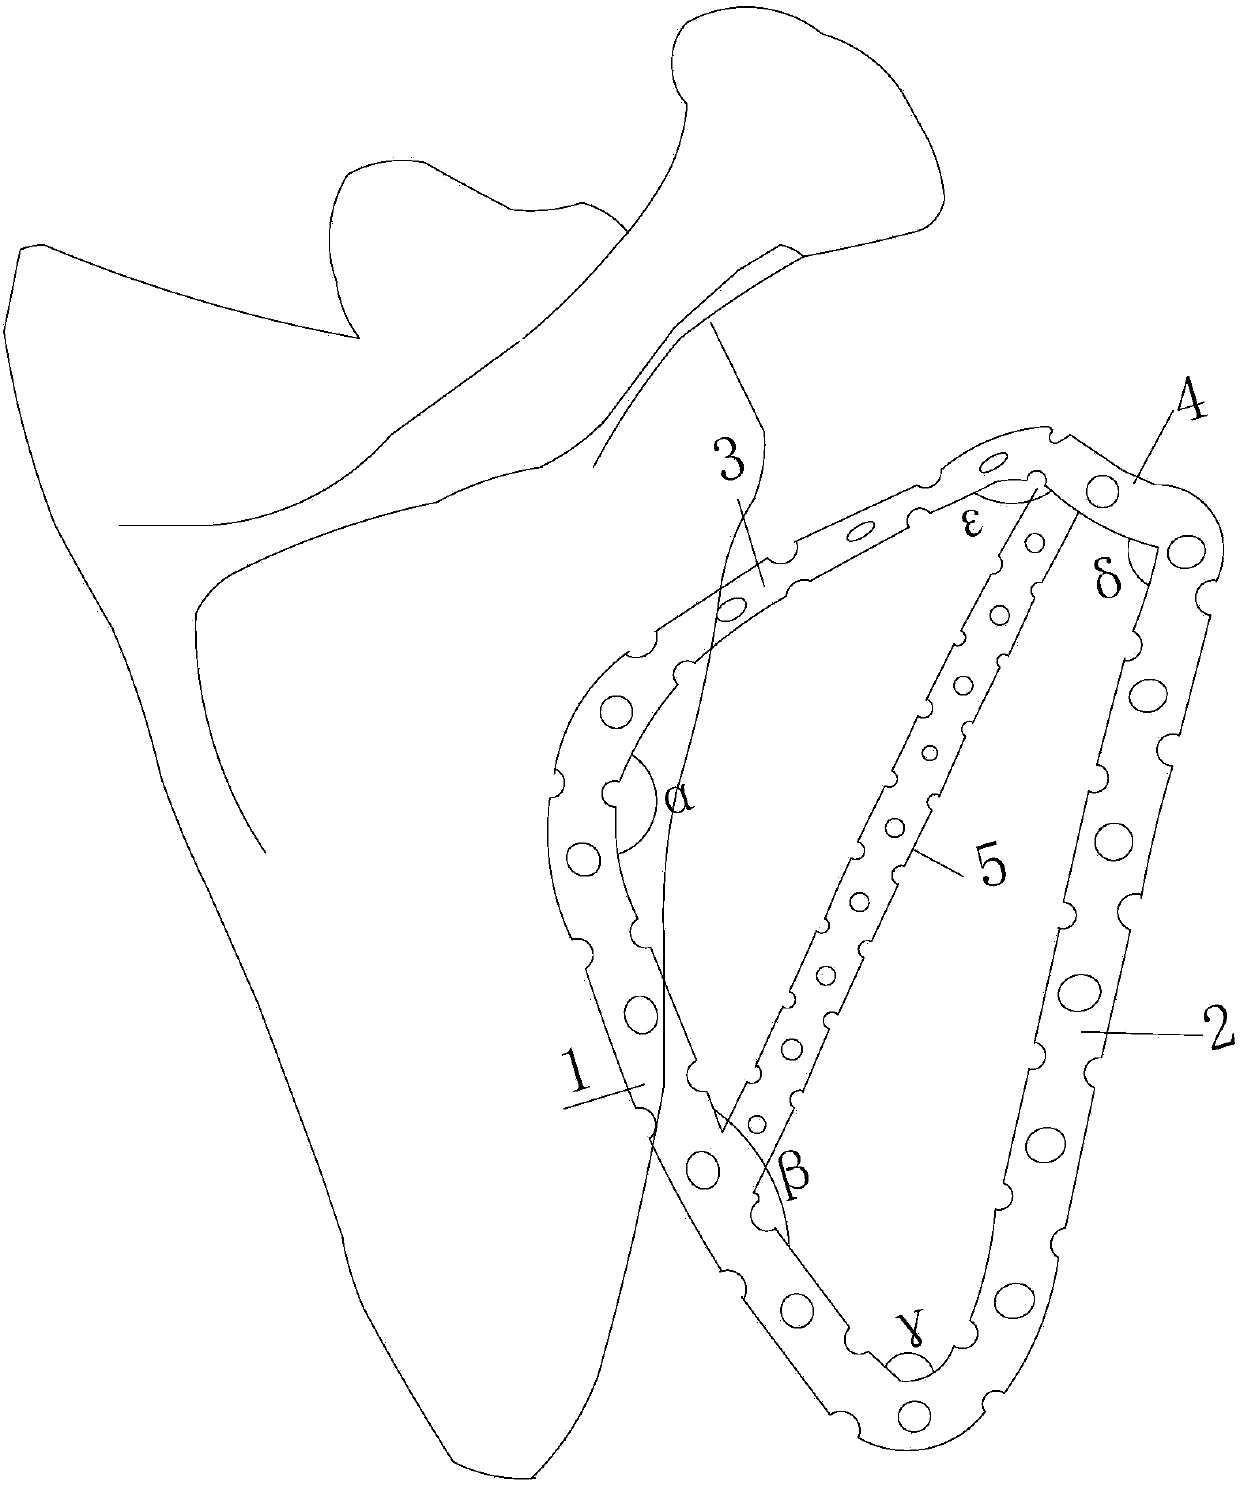 An anatomical plate for complex scapular body fractures